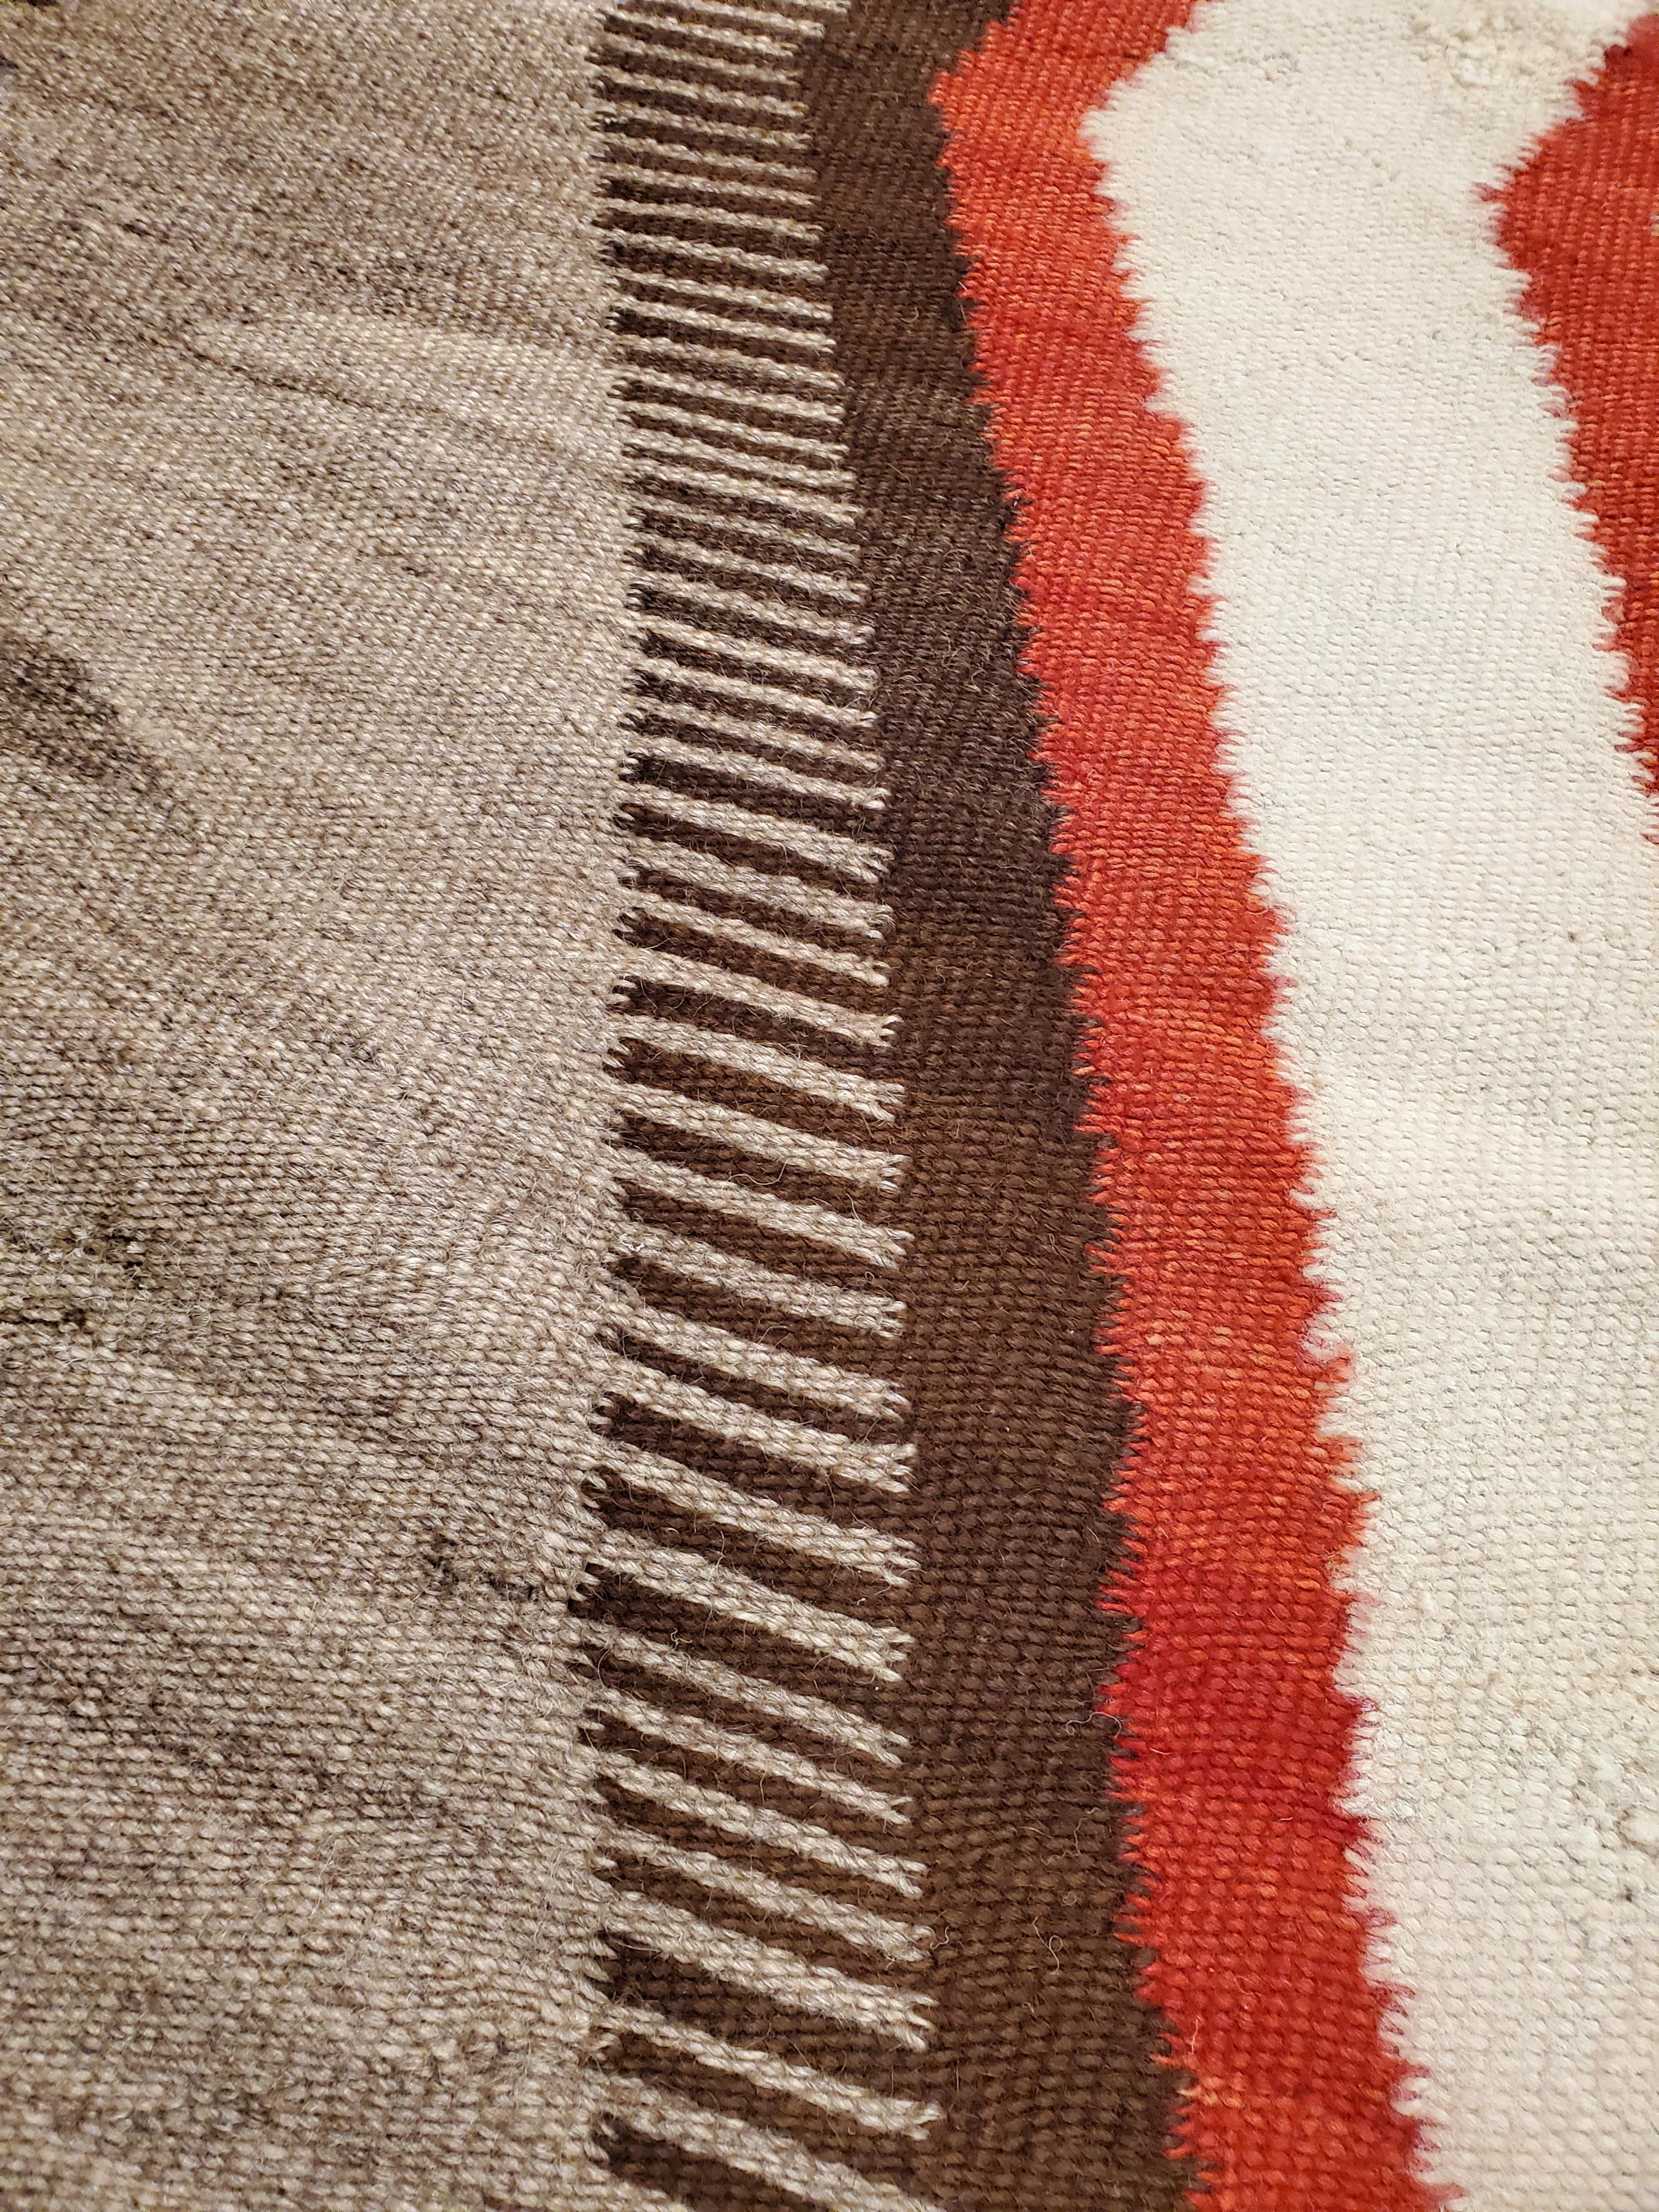 20th Century Antique Navajo Carpet, Storm Pattern Rug, Handmade Wool Rug, Gray, Red and Brown